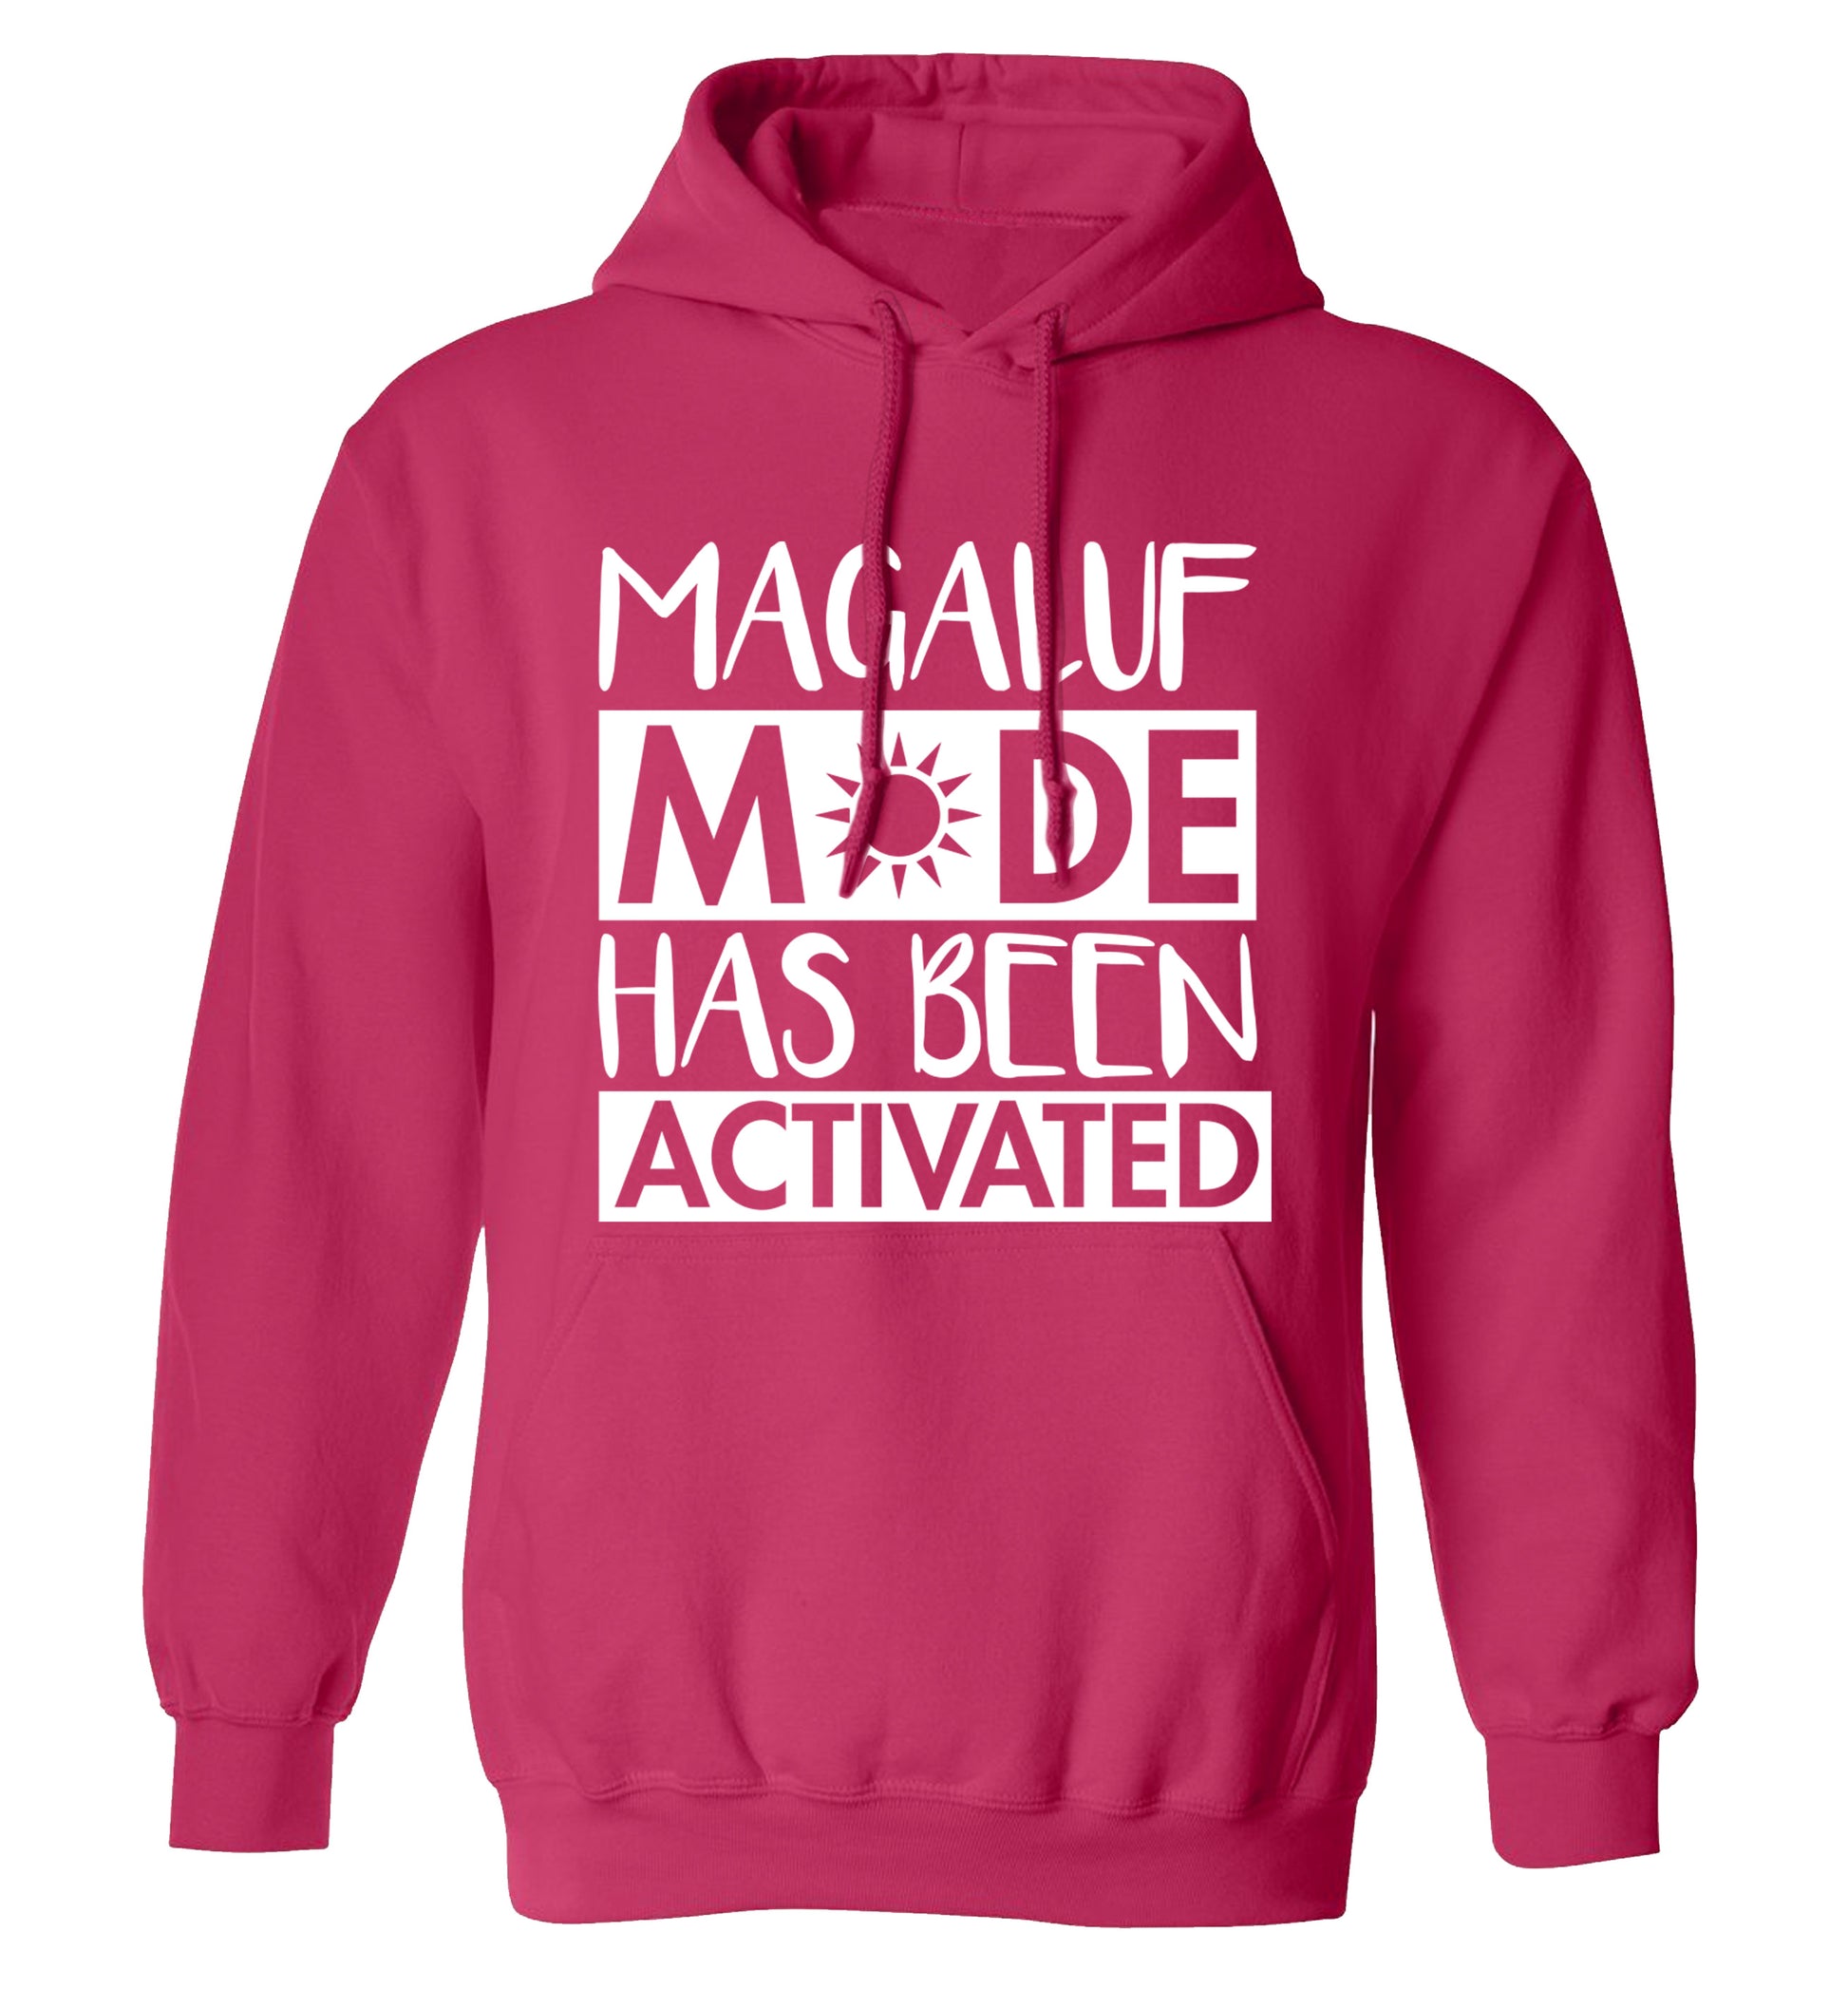 Magaluf mode has been activated adults unisex pink hoodie 2XL